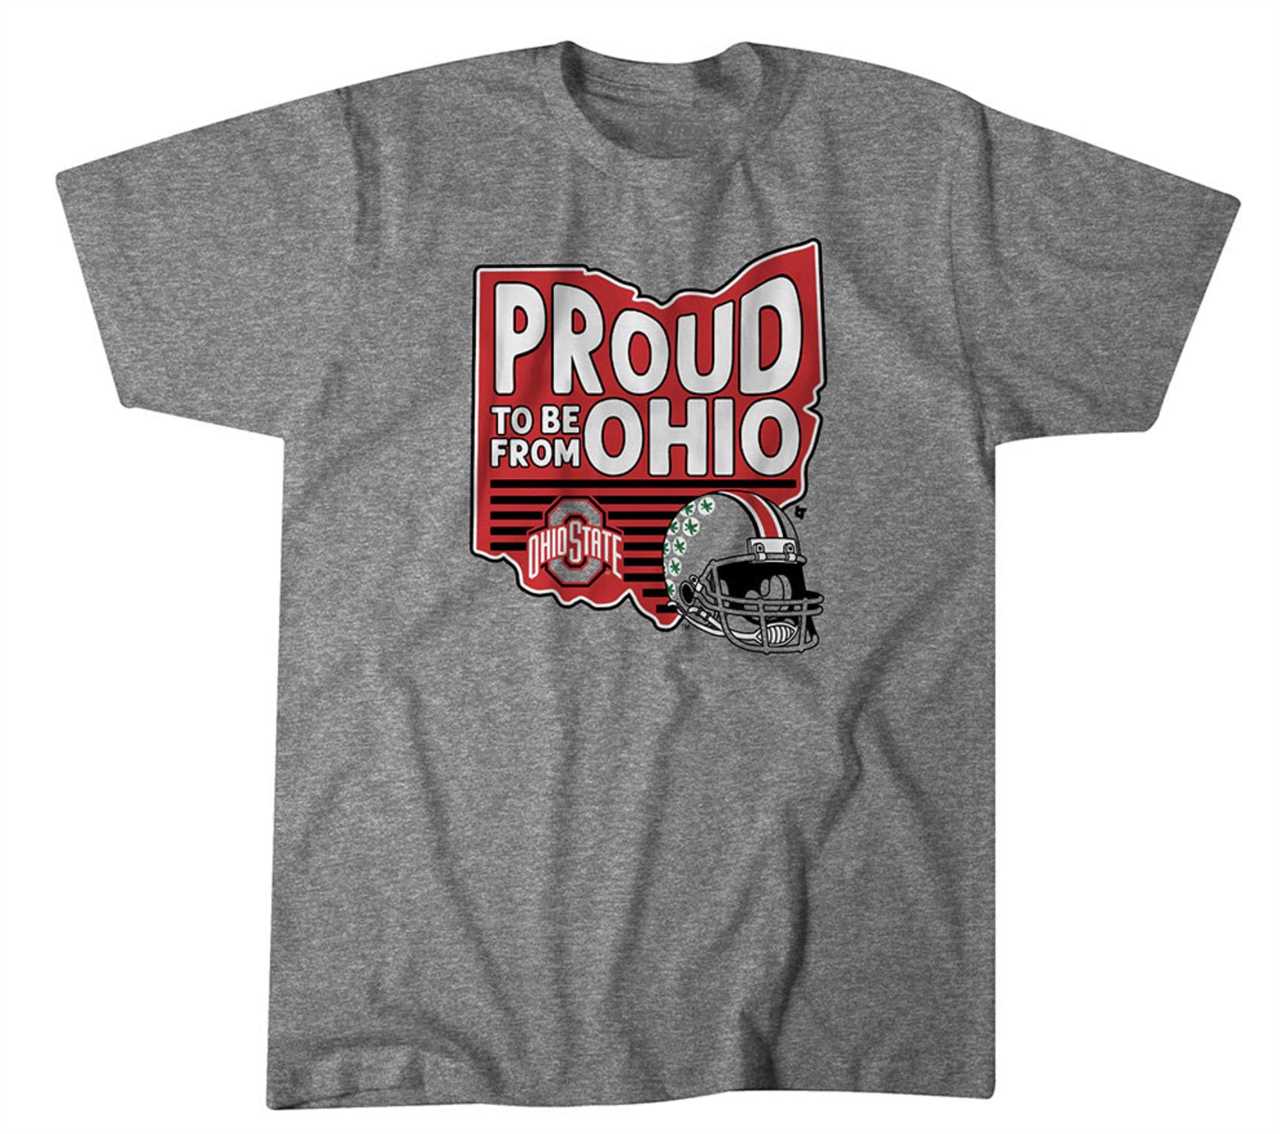 Ohio State Football: Proud To Be From Ohio T-Shirt 